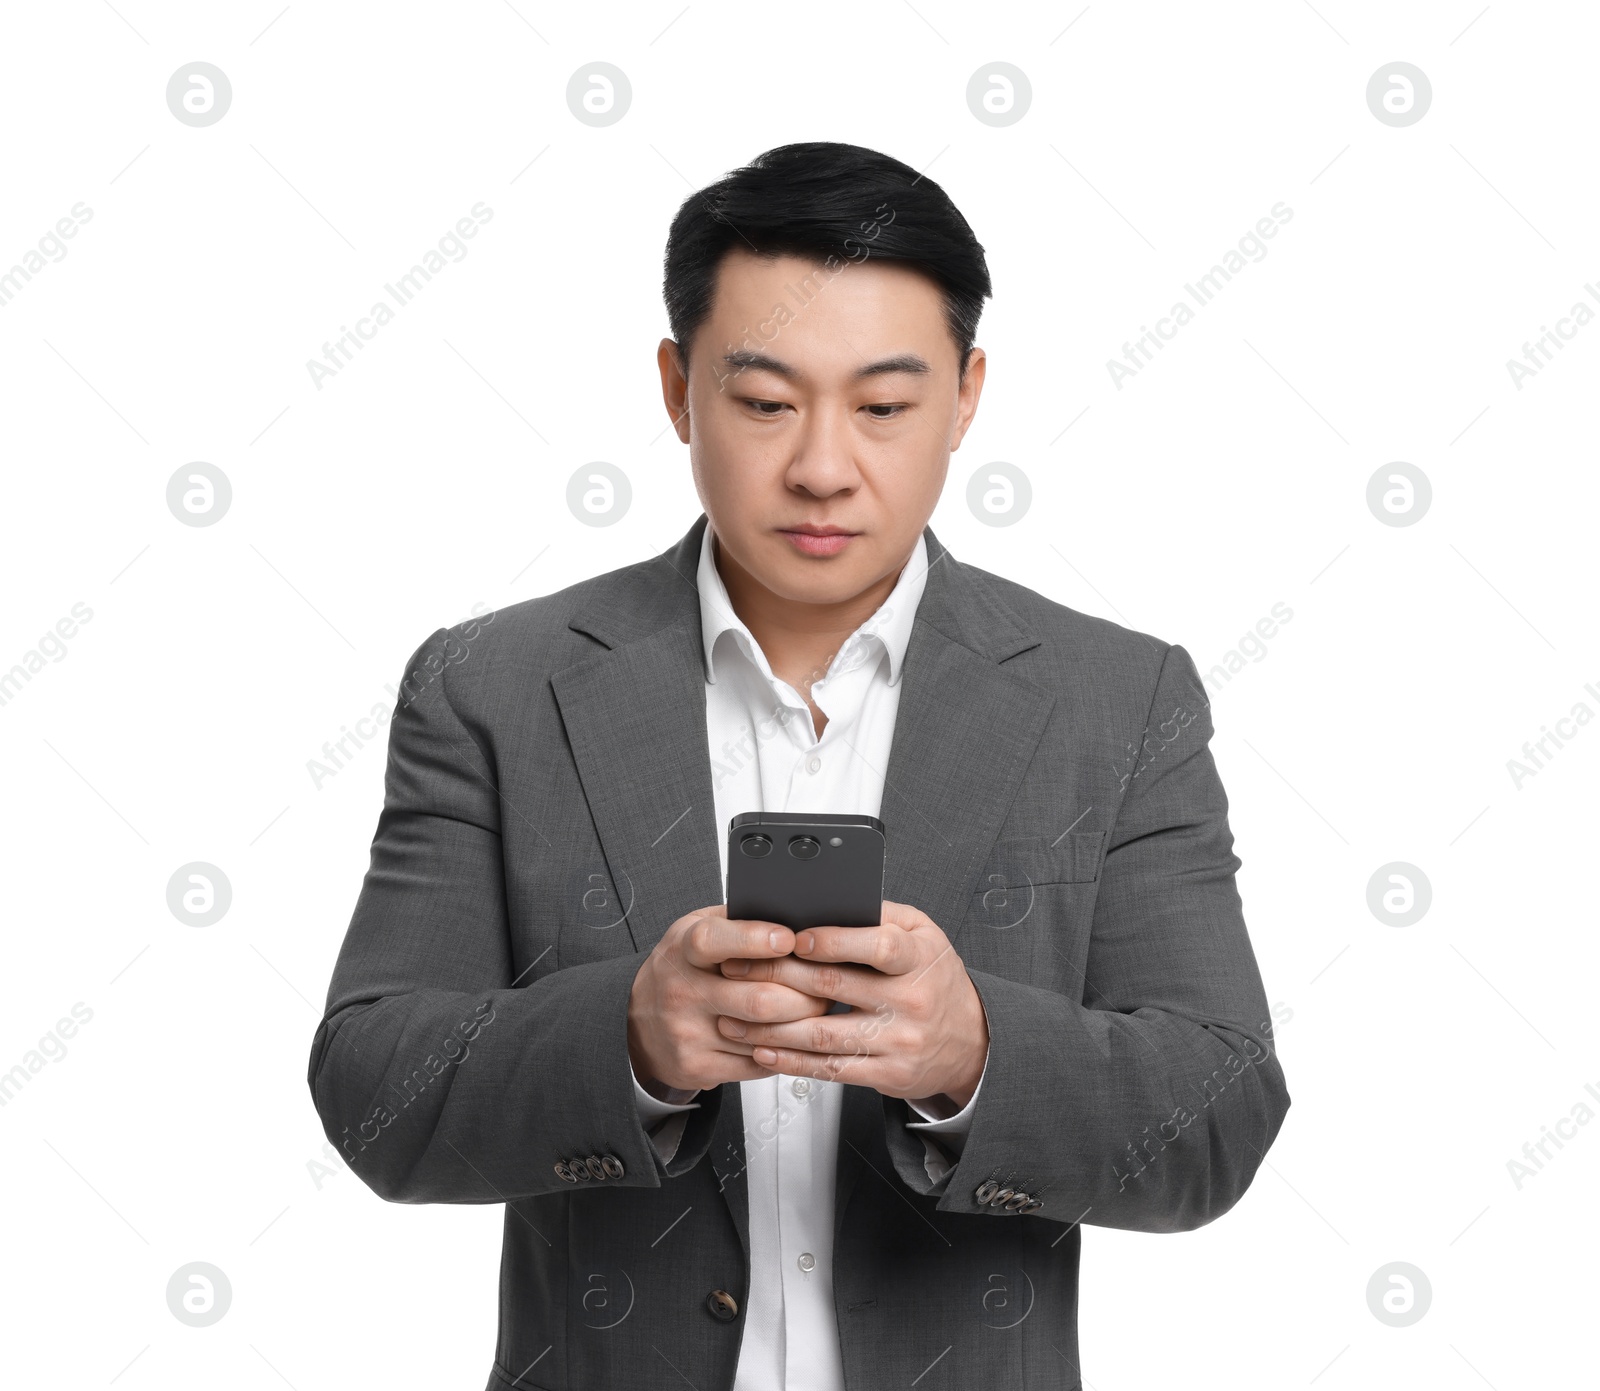 Photo of Businessman in suit using smartphone on white background